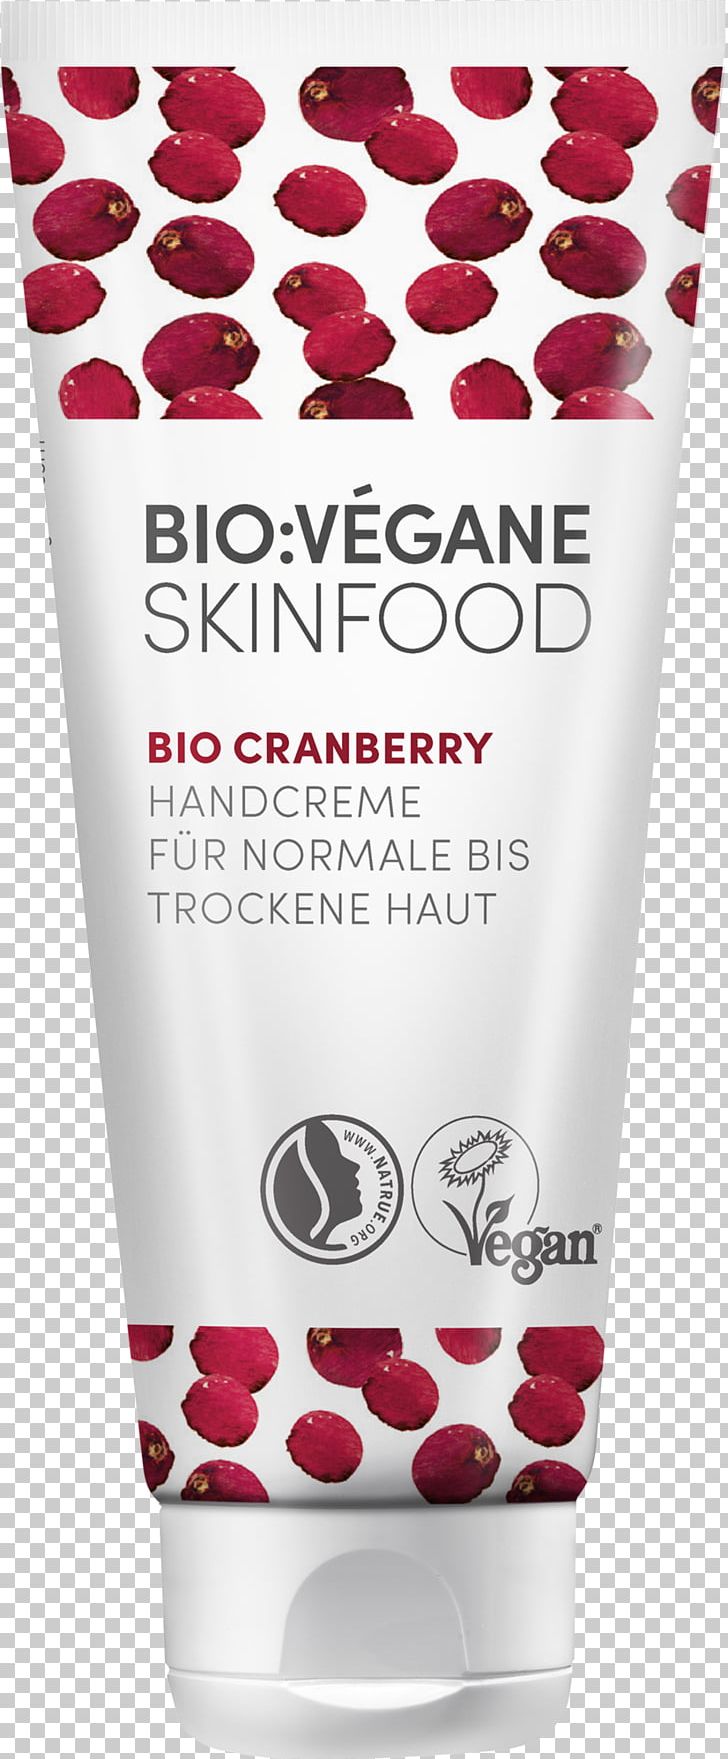 Cream Organic Food Veganism Lotion Cranberry PNG, Clipart, Cosmetics, Cranberry, Cream, Food Drinks, Goji Free PNG Download